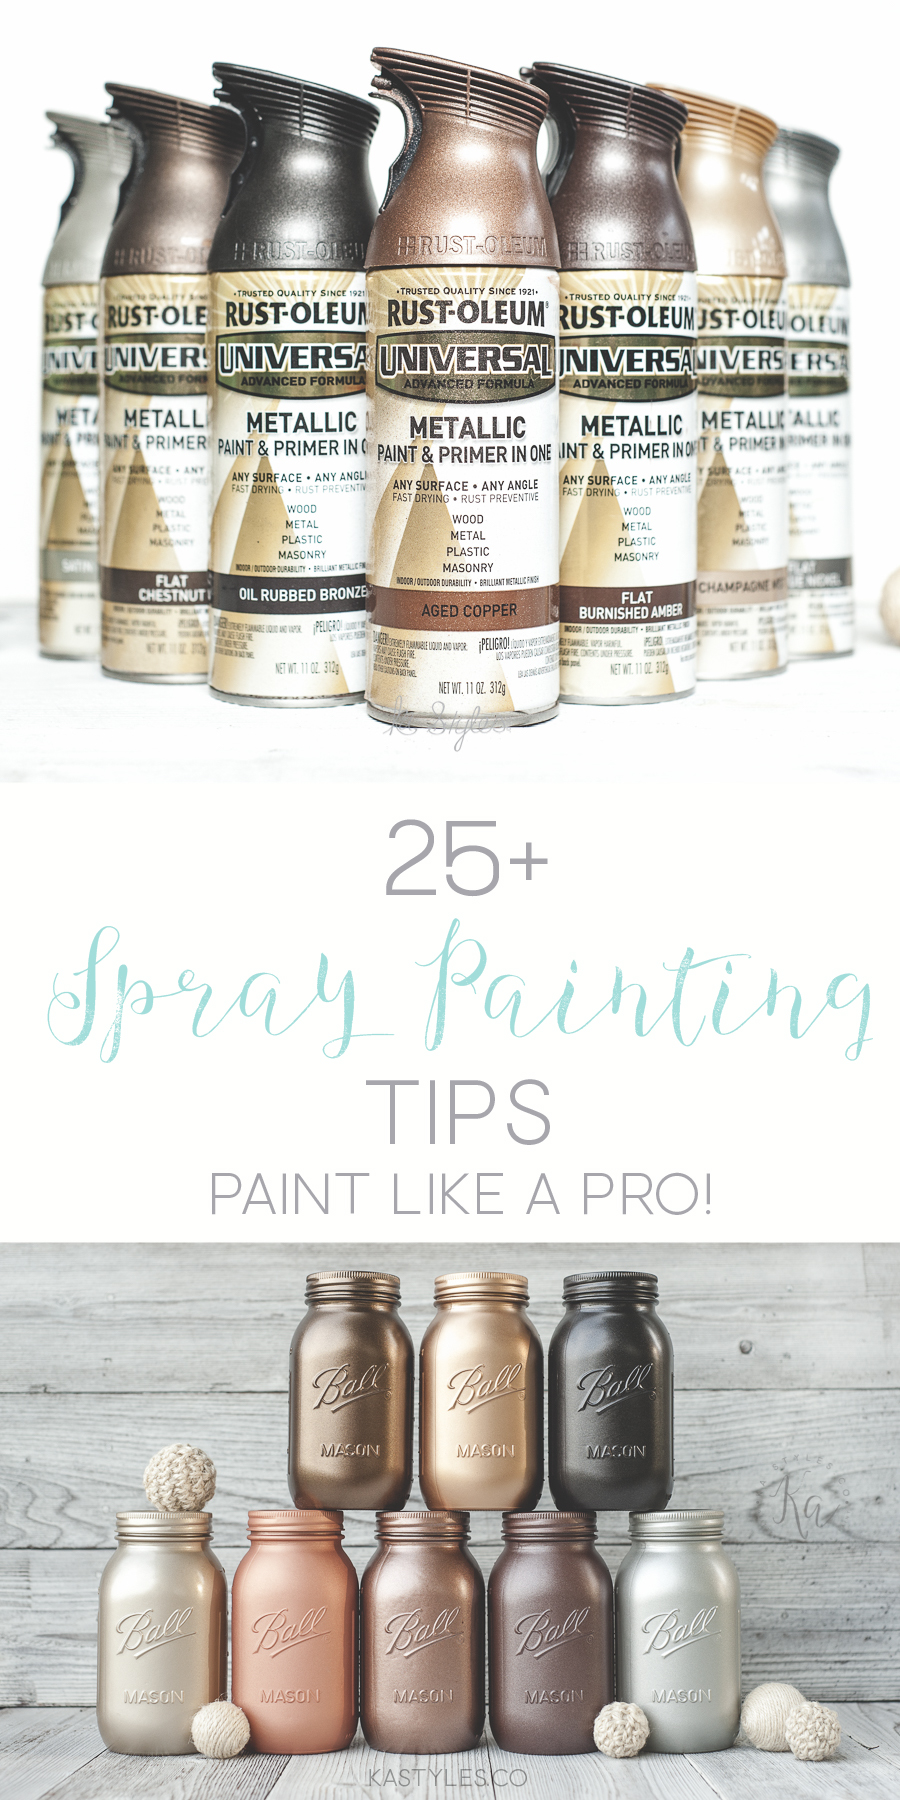 25+ Spray painting tips. Learn how to spray paint like a pro!